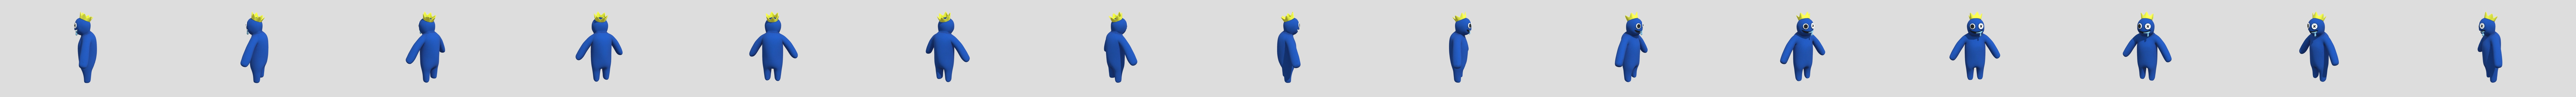 BLUE FROM ROBLOX RAINBOW FRIENDS CHAPTER 2 ODD WORLD, 3D FA, 3D models  download